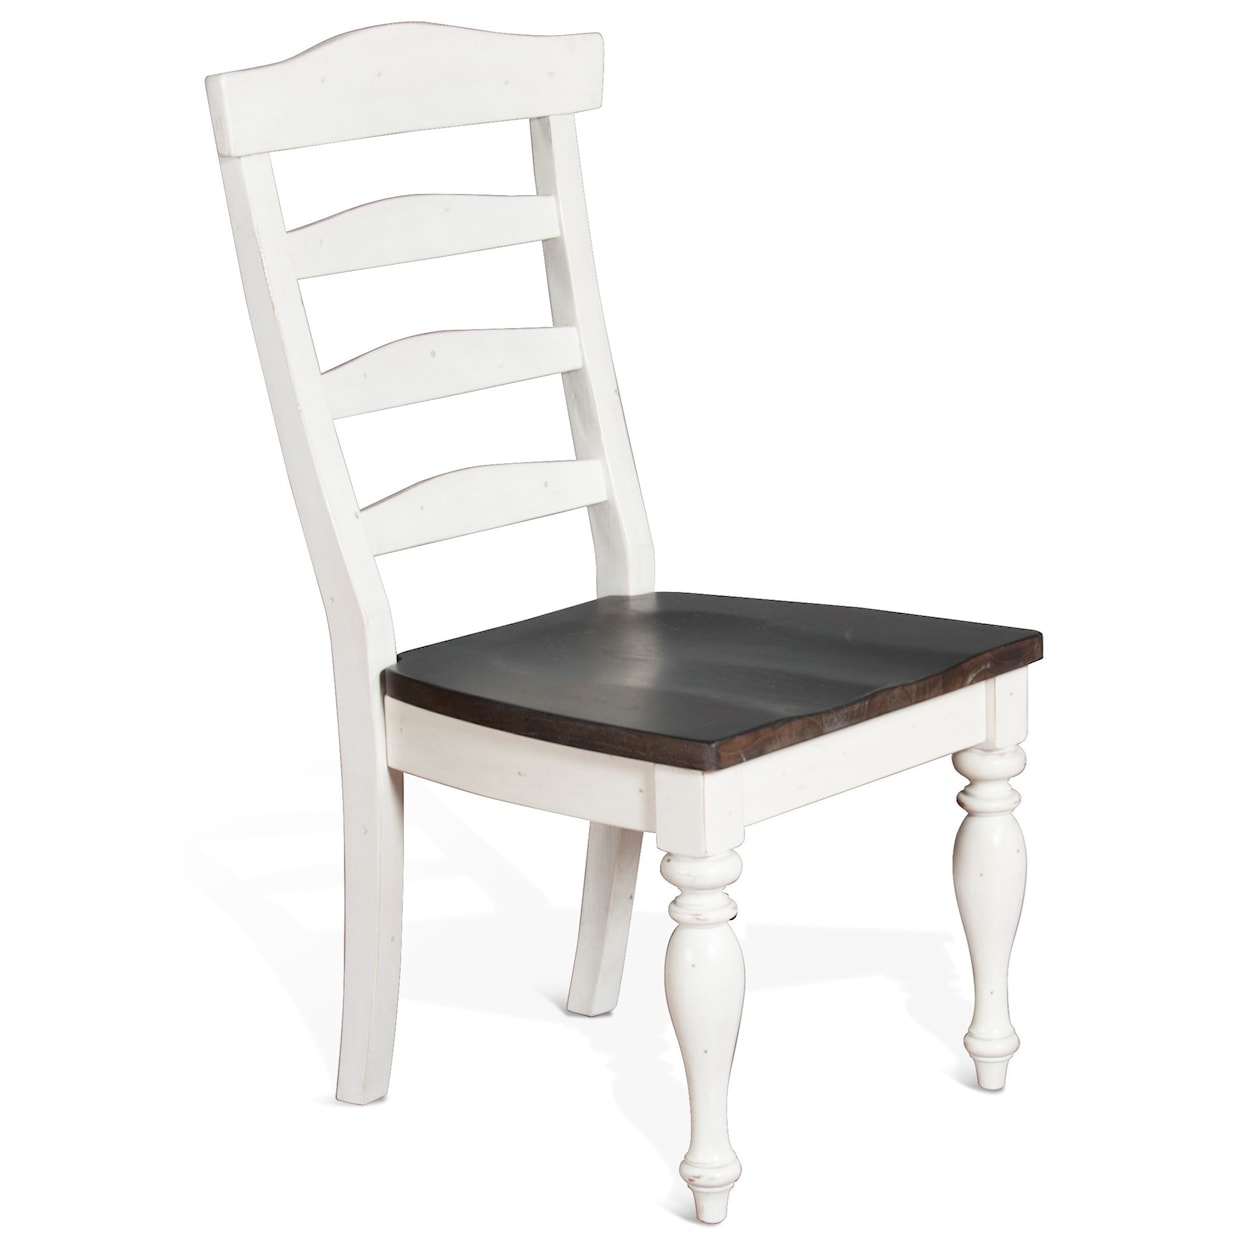 Sunny Designs Carriage House Ladderback Chair